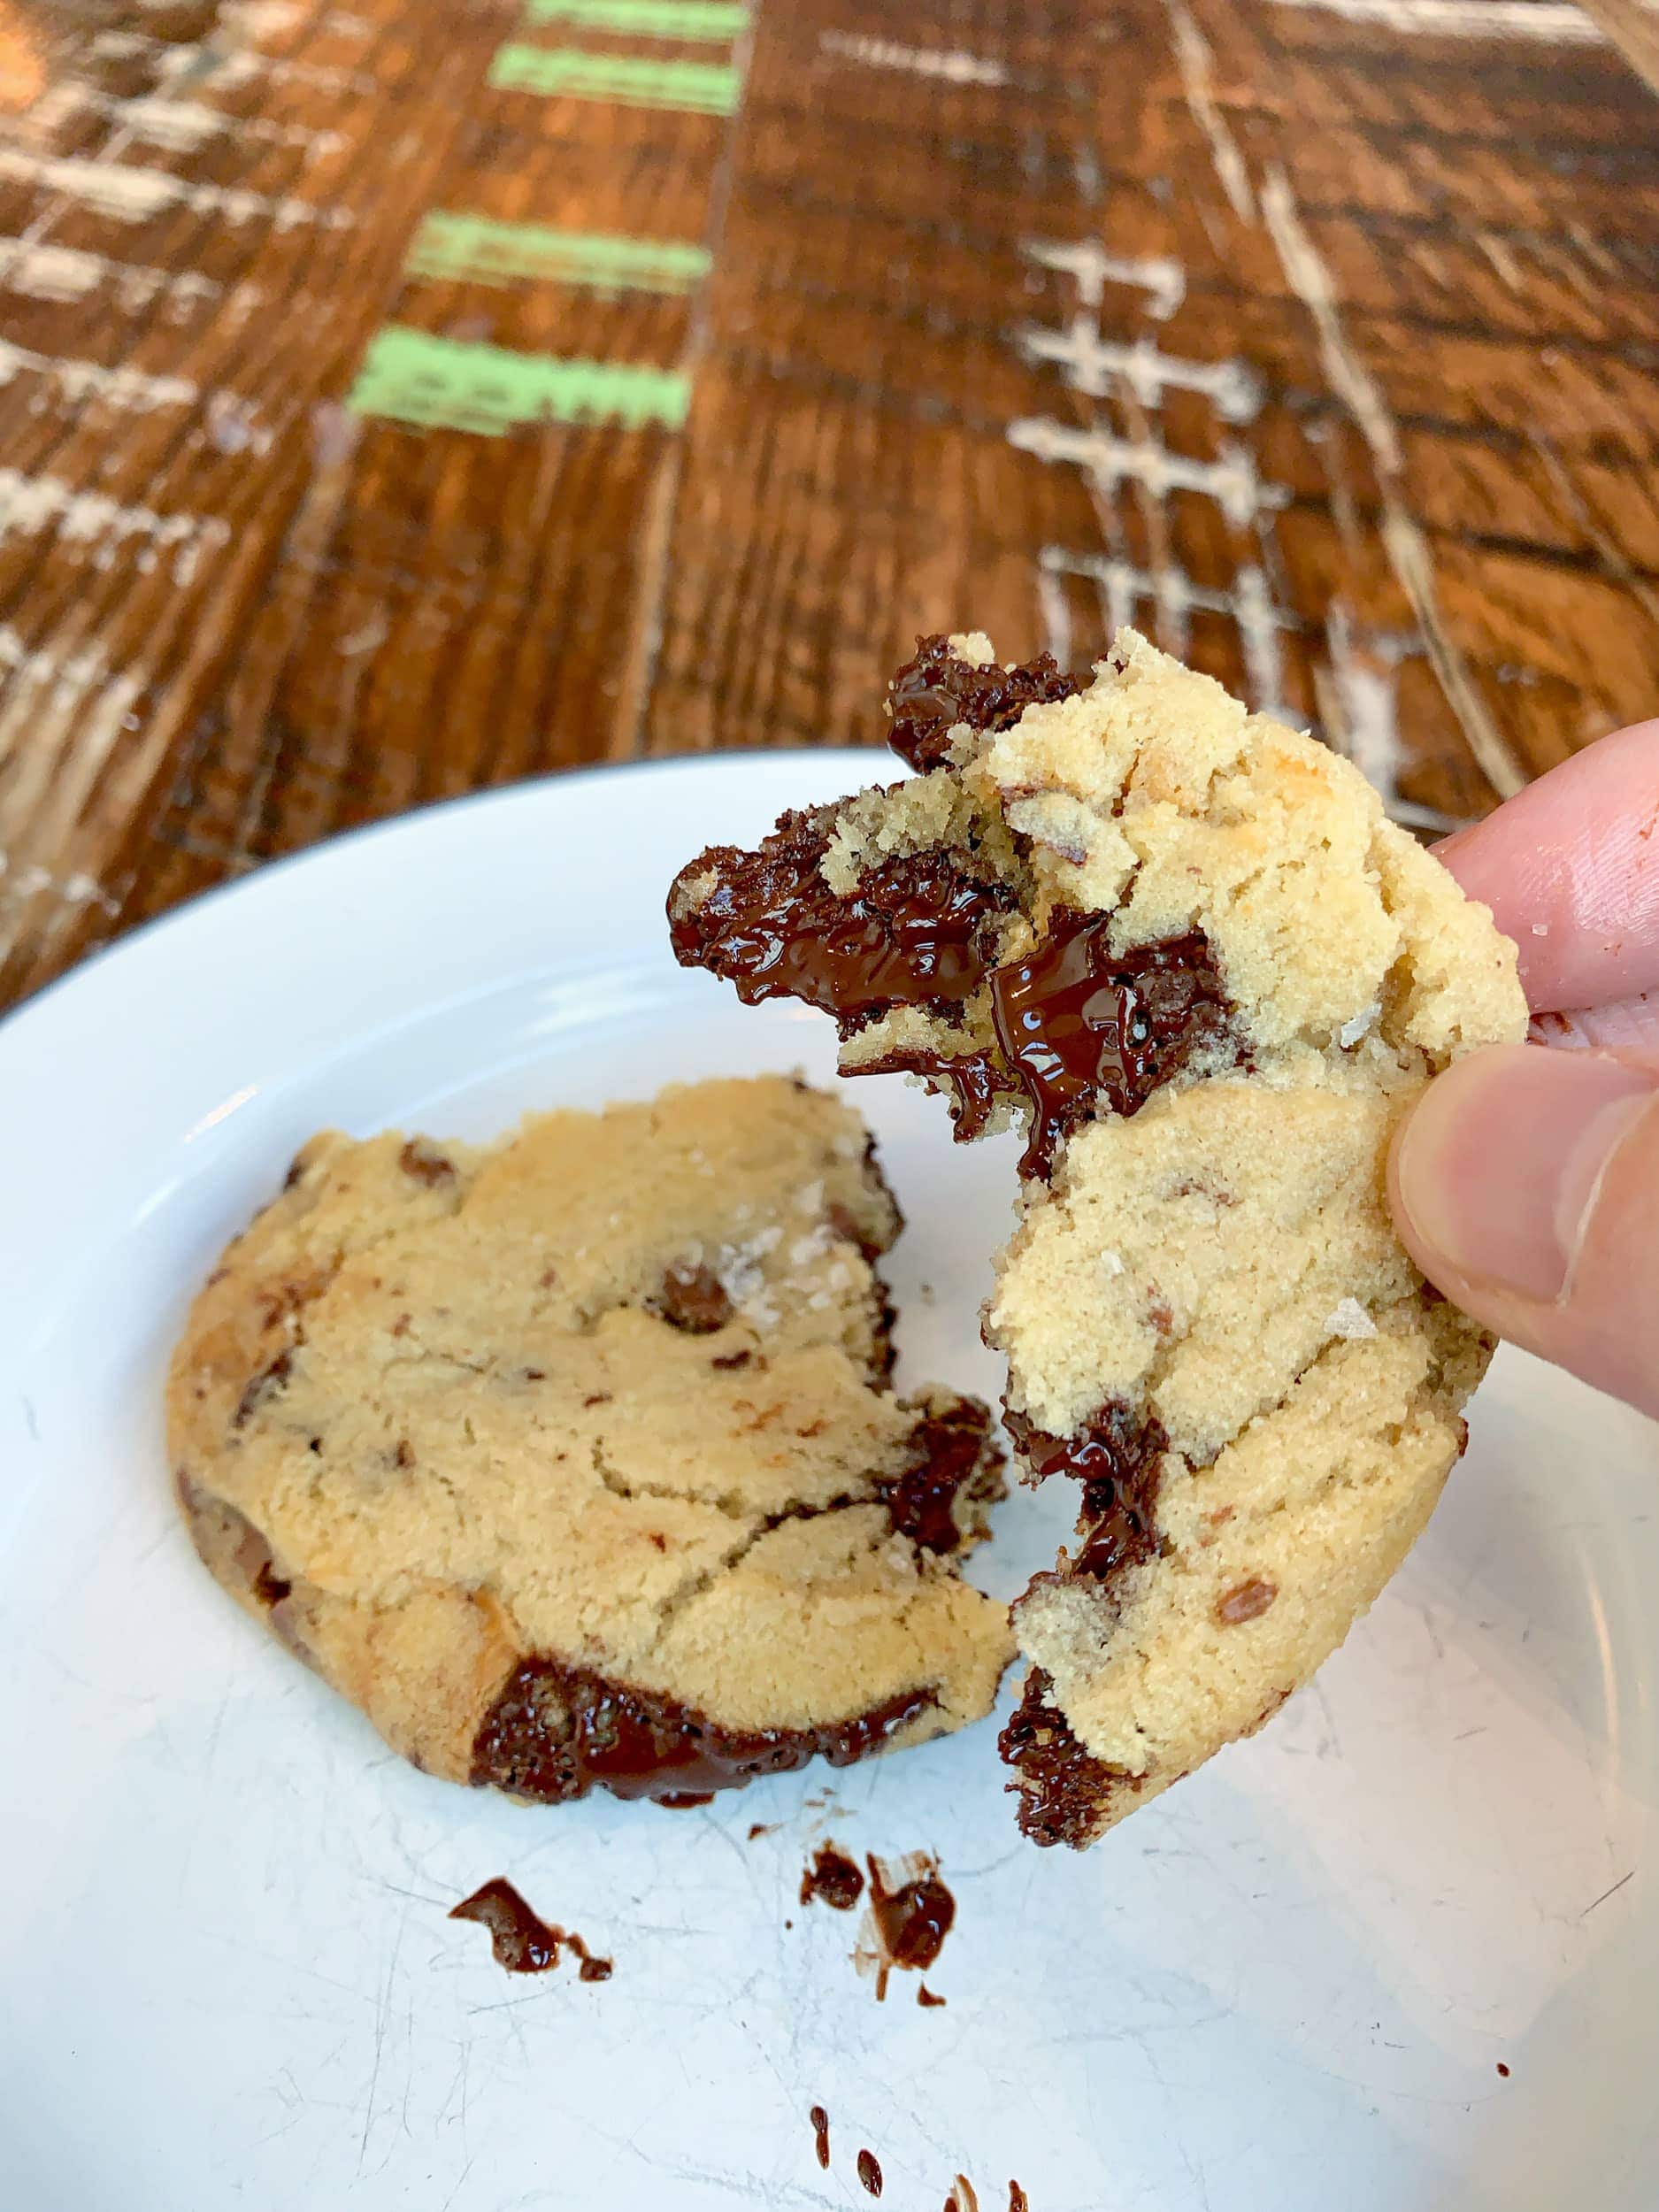 Chocolate chip cookie at Willa Jean in New Orleans